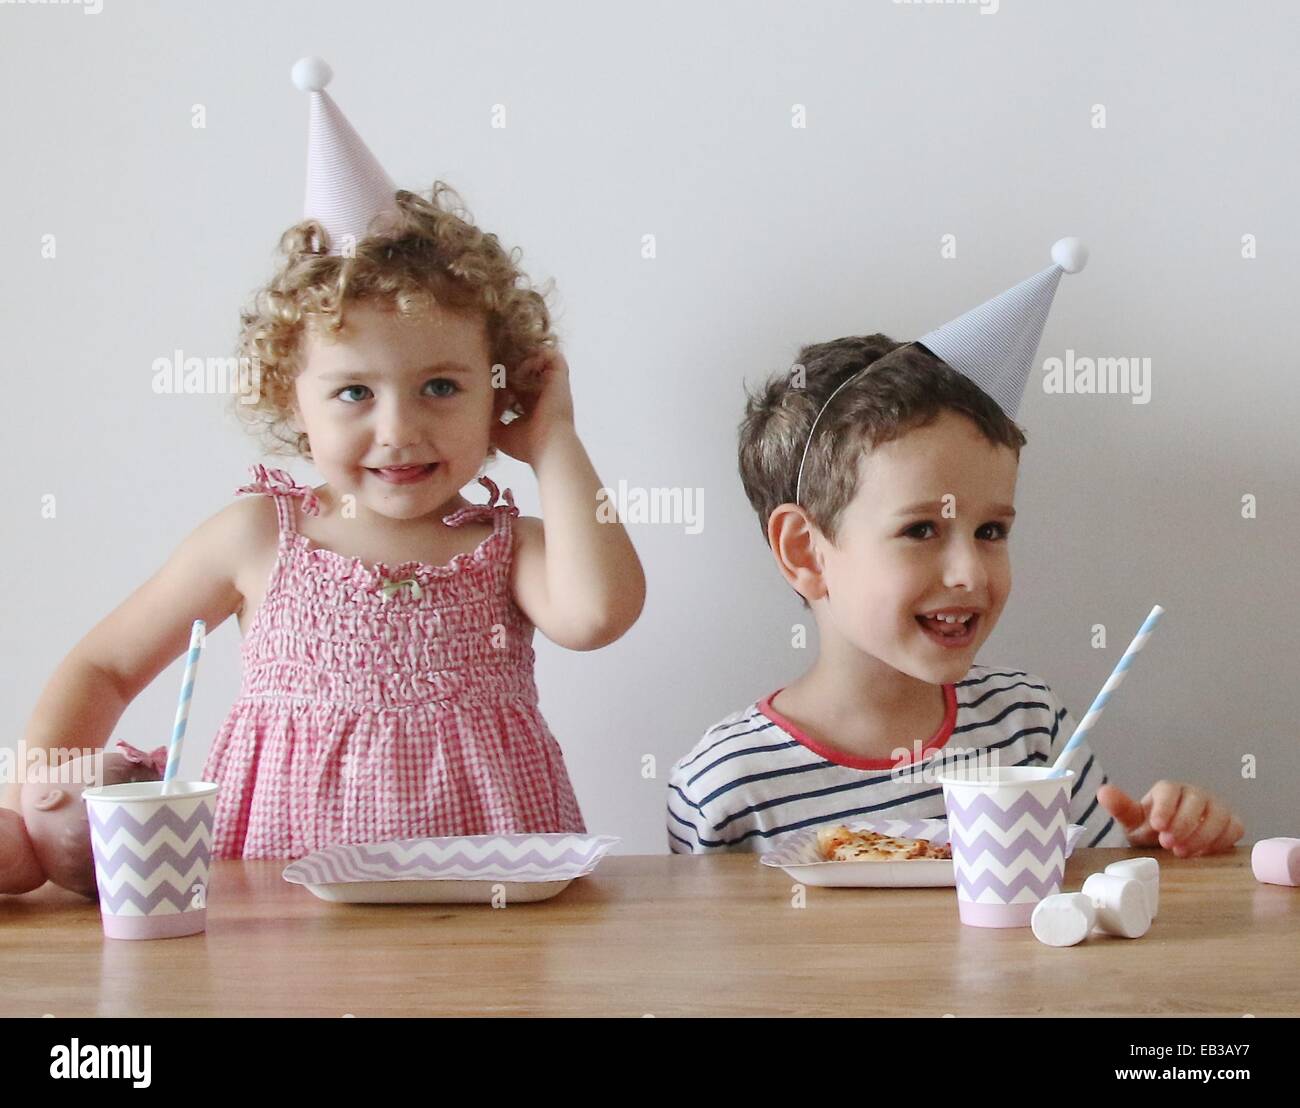 Portrait of two children sitting at a table eating and drinking at a birthday party Stock Photo